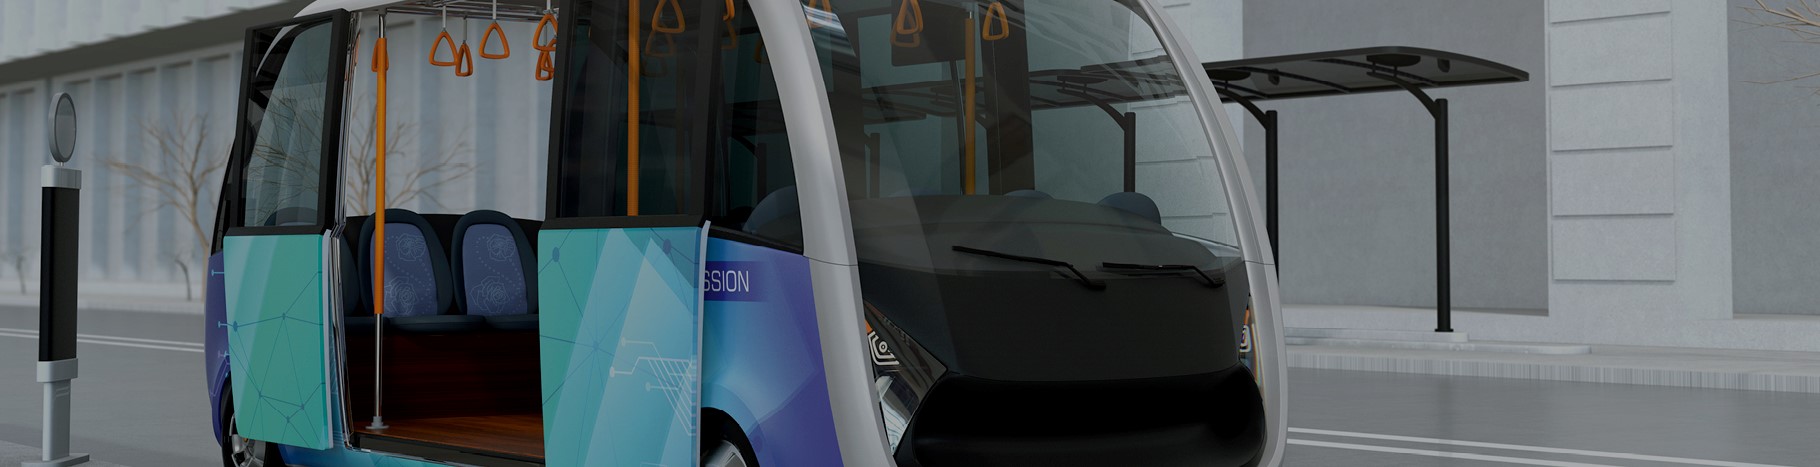 Self-driving shuttle bus waiting at bus station. The bus station equipped with solar panels for electric power.